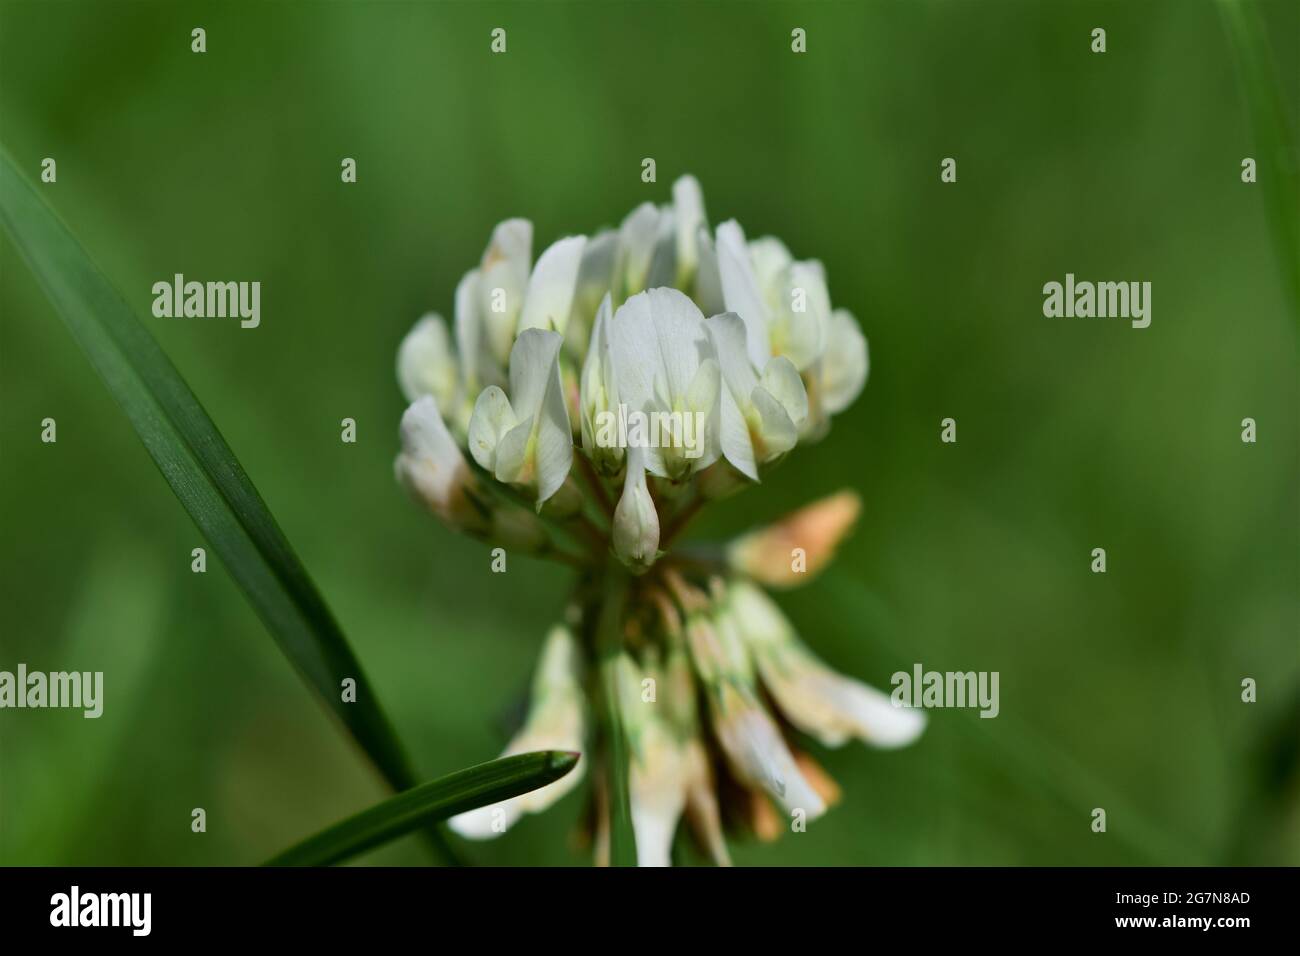 Close up of a white clover blossom against green blurred grasses as background Stock Photo